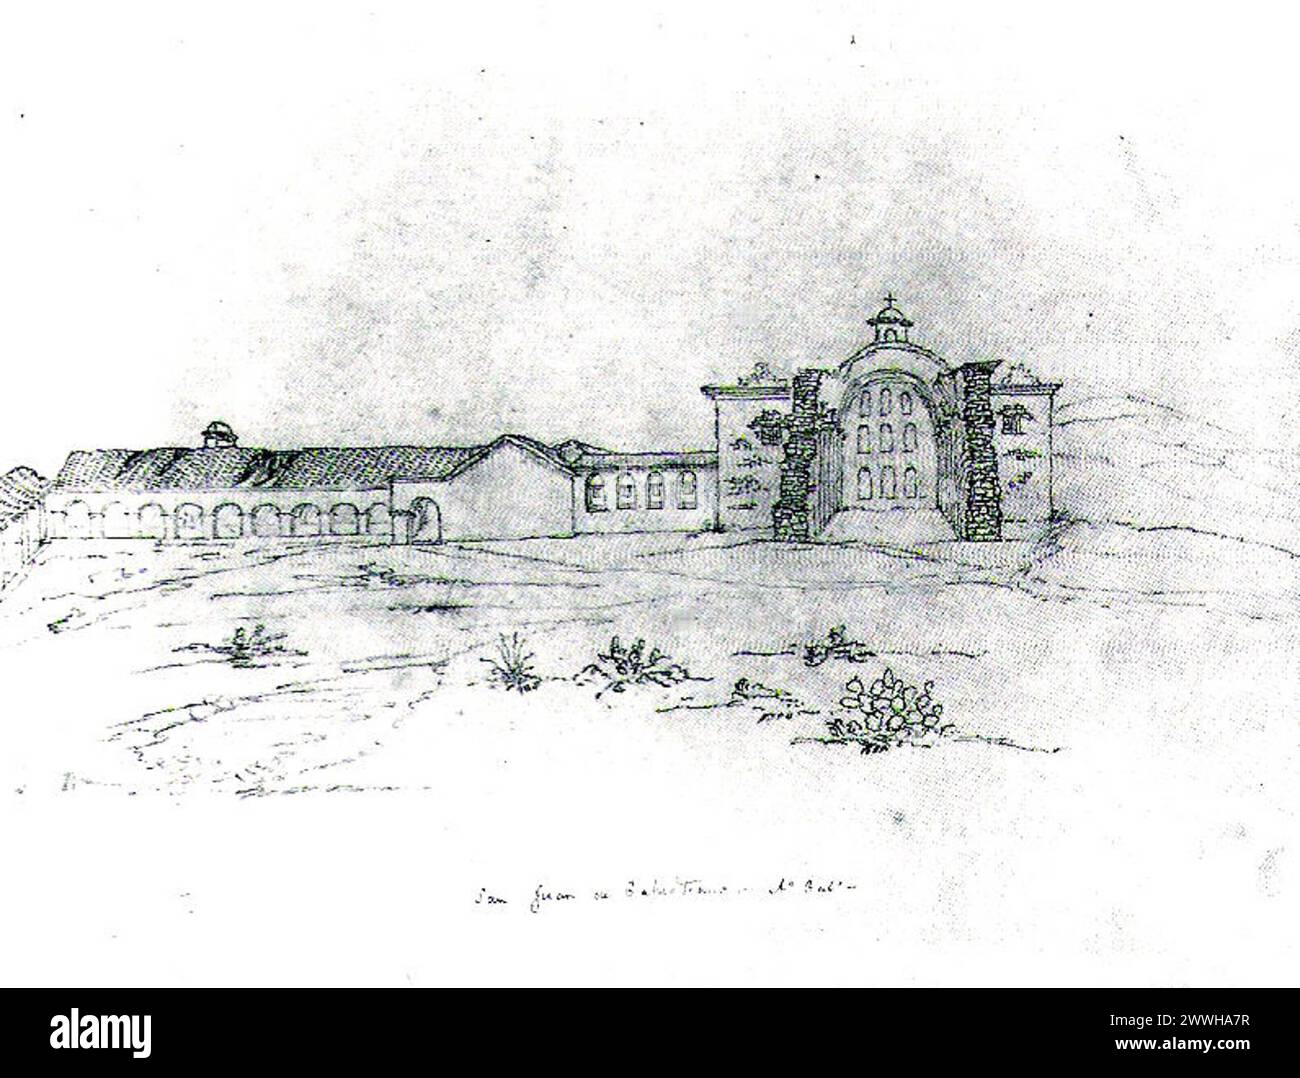 https://en.wikipedia.org/wiki/Mission San Juan Capistrano#/media/File:San Juan Capistrano 1850 by HMT Powell.jpg::text=A%20pencil%20sketch%20of%20Mission%20San%20Juan%20Capstrano%20drawn%20by%20H.M.T.%20Powell%20in%201850%20shows%20the%20domes%20over%20the%20sanctuary%20and%20transept%2C%20and%20much%20of%20the%20side%20walls%2C%20as%20being%20intact%20at%20the%20time Banque D'Images